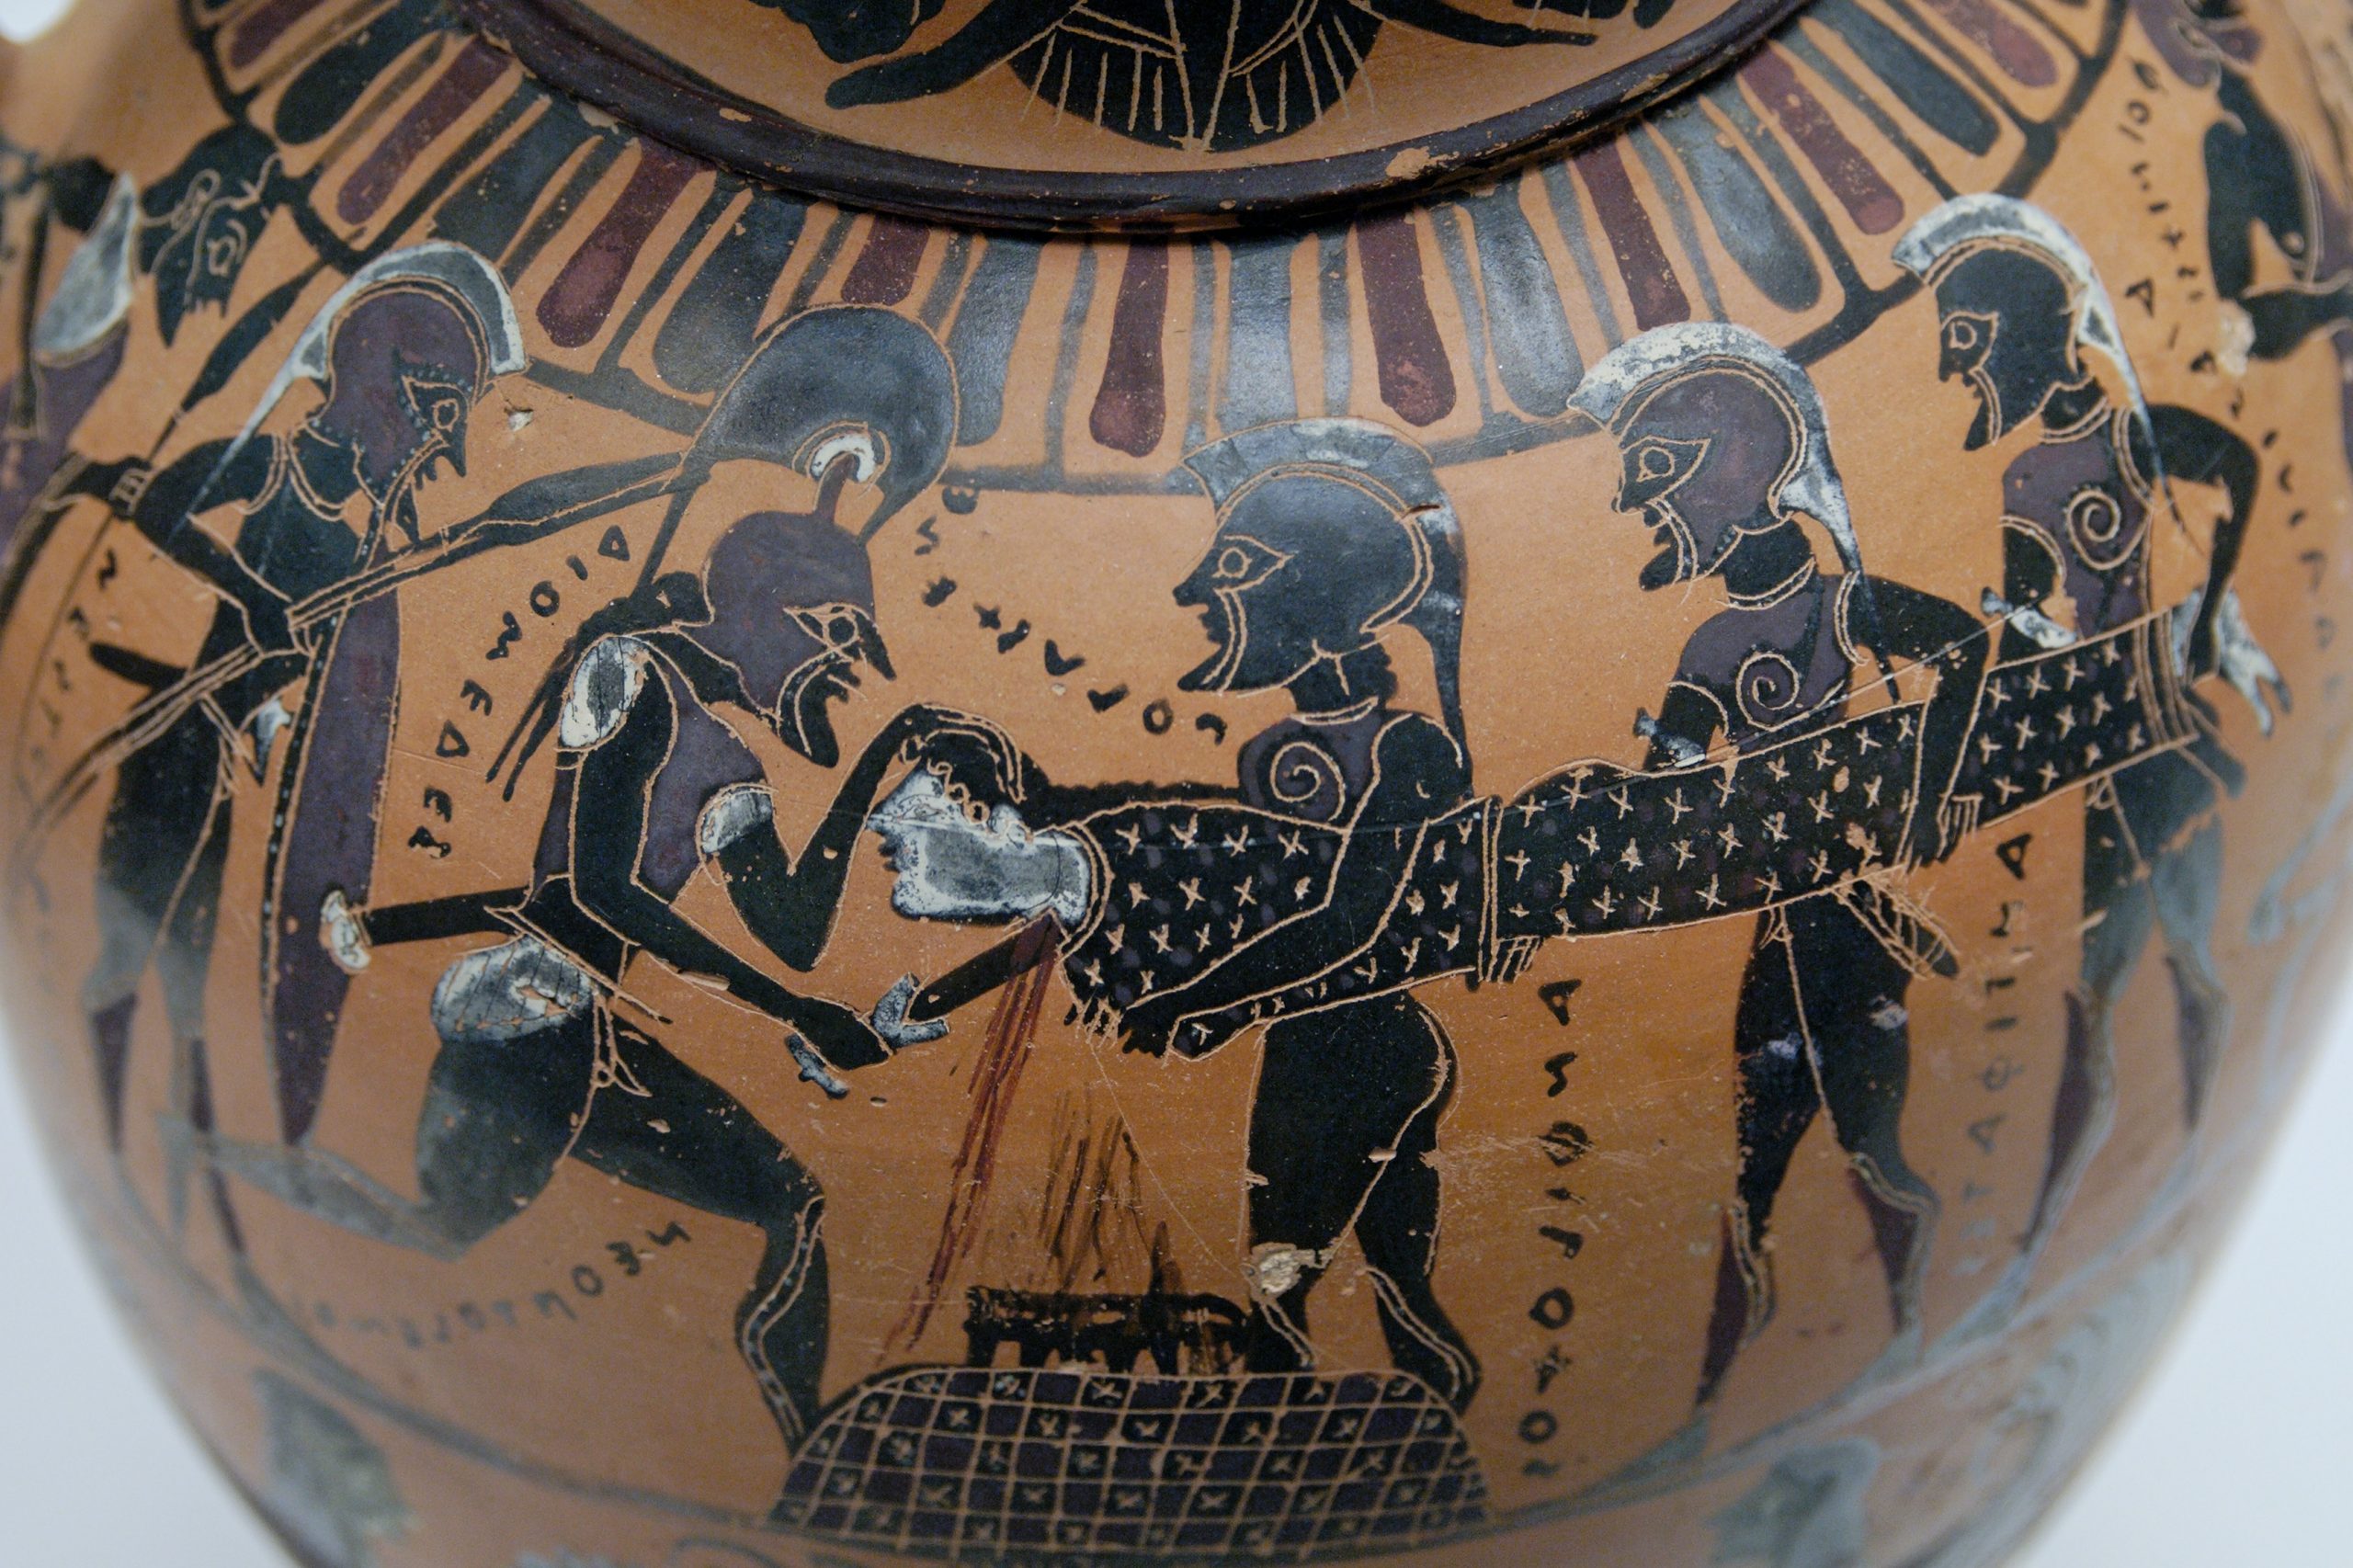 Three warriors hold Polyxena, a young woman, over an altar. Neoptolemus, labelled, stabs her neck with a knife and blood pours out. Other Greek warriors watch.